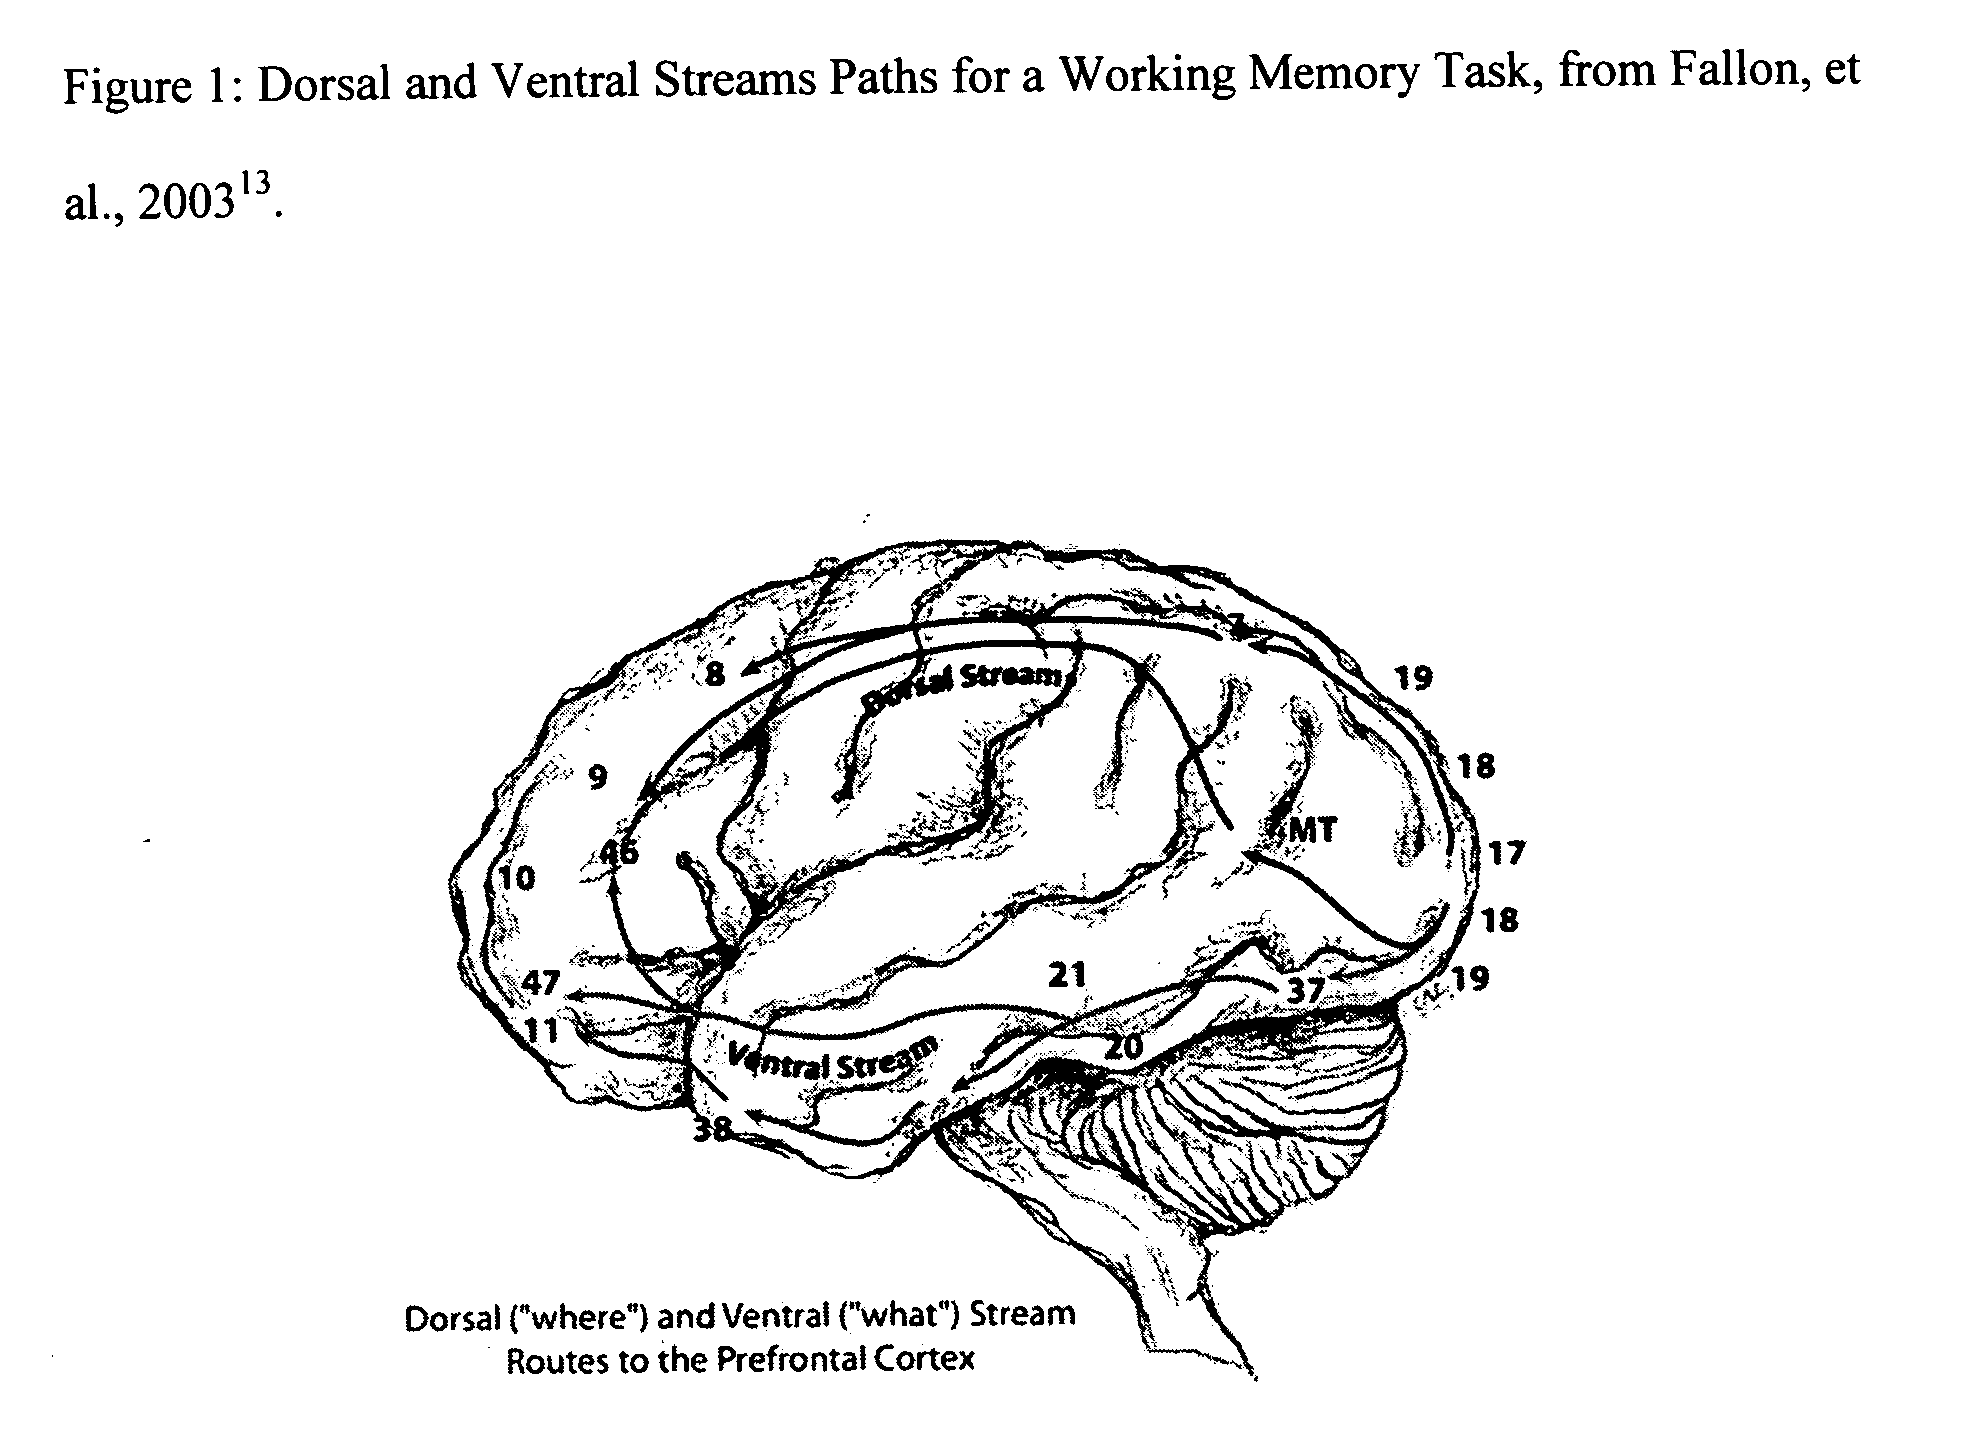 Method for diagnosing, detecting, and monitoring brain function including neurological disease and disorders